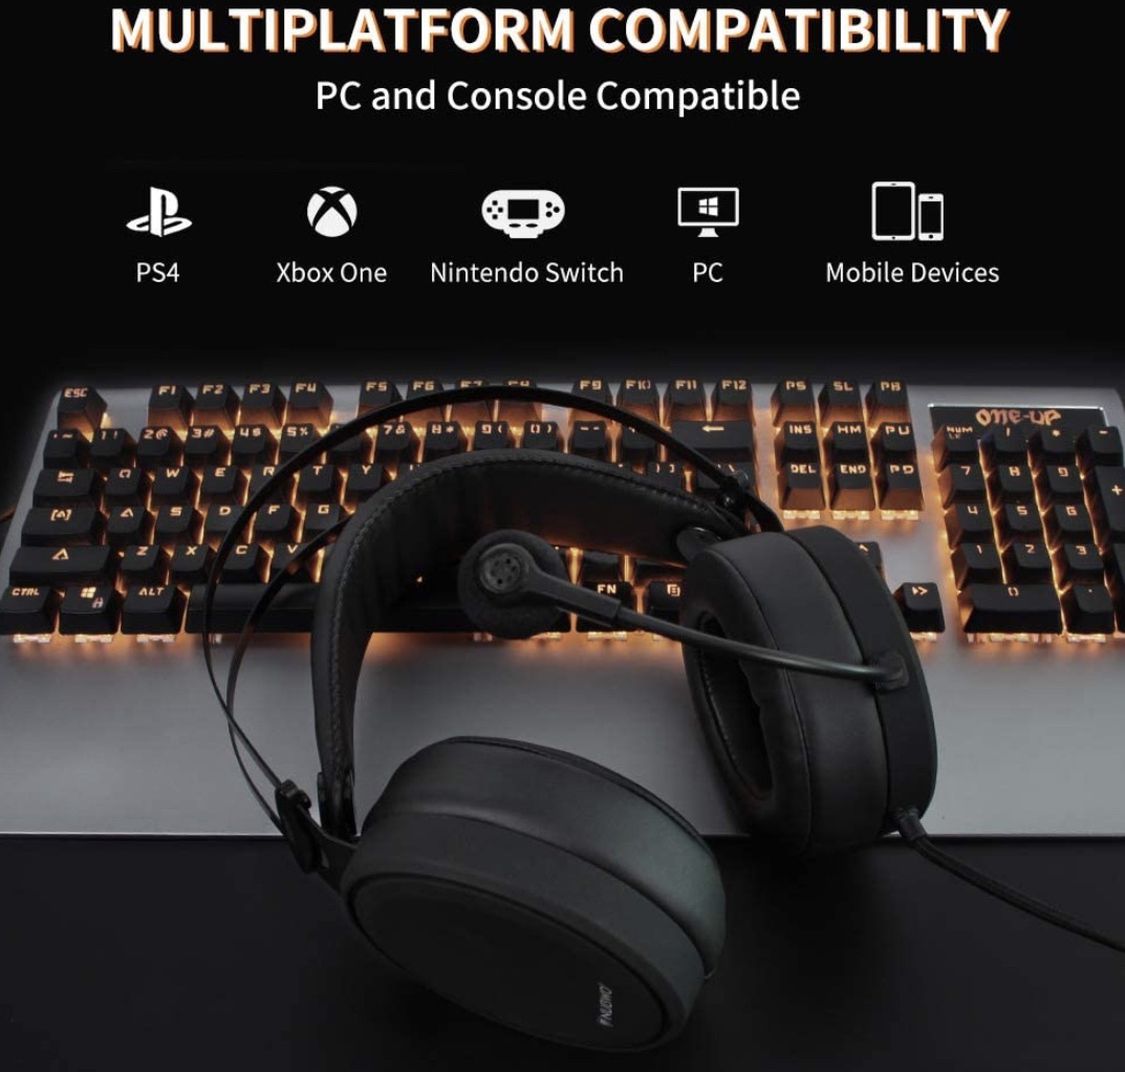 NEW! Gaming headsets PS4 N7 Stereo Xbox one Headset Wired PC Gaming Headphones with Noise Canceling Mic , Over Ear Gaming Headphones for PC/MAC/PS4/Xb